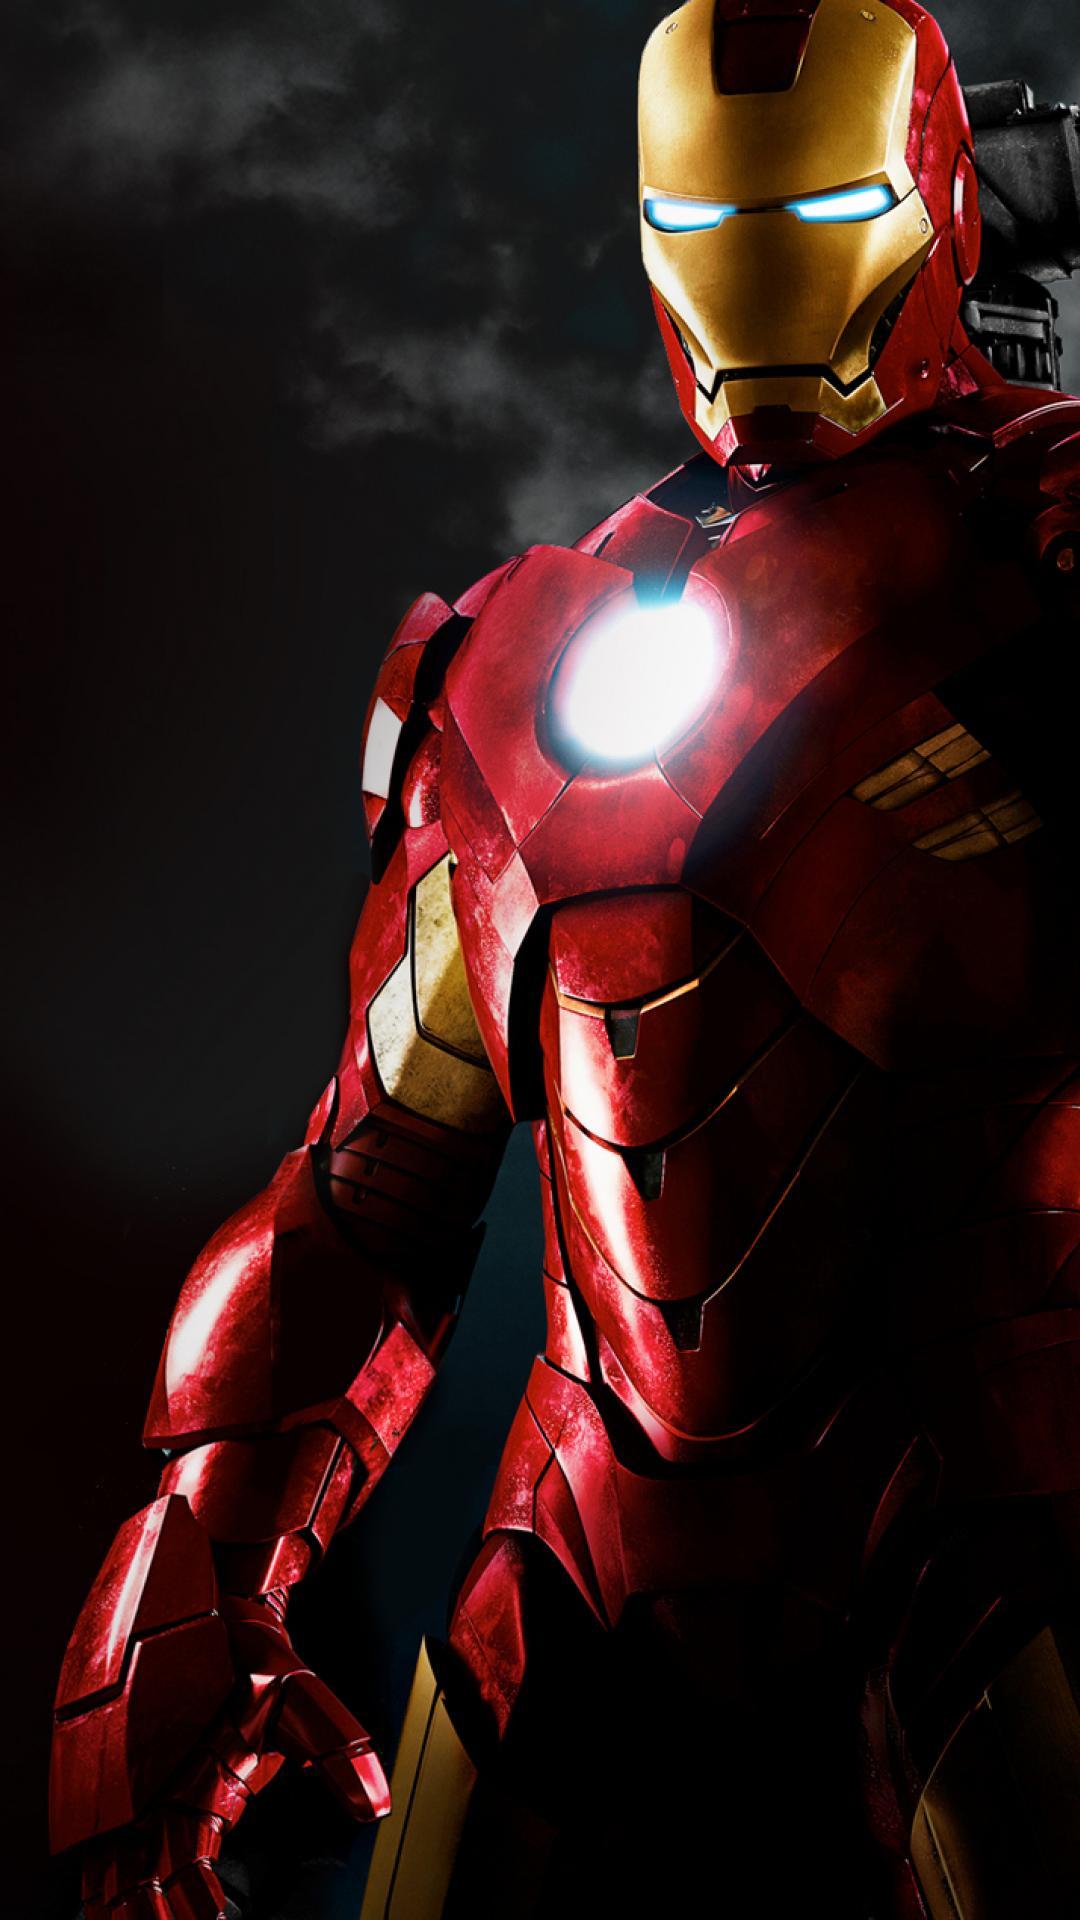 Iron Man Hd Wallpaper For Mobile 1920x1080 Download